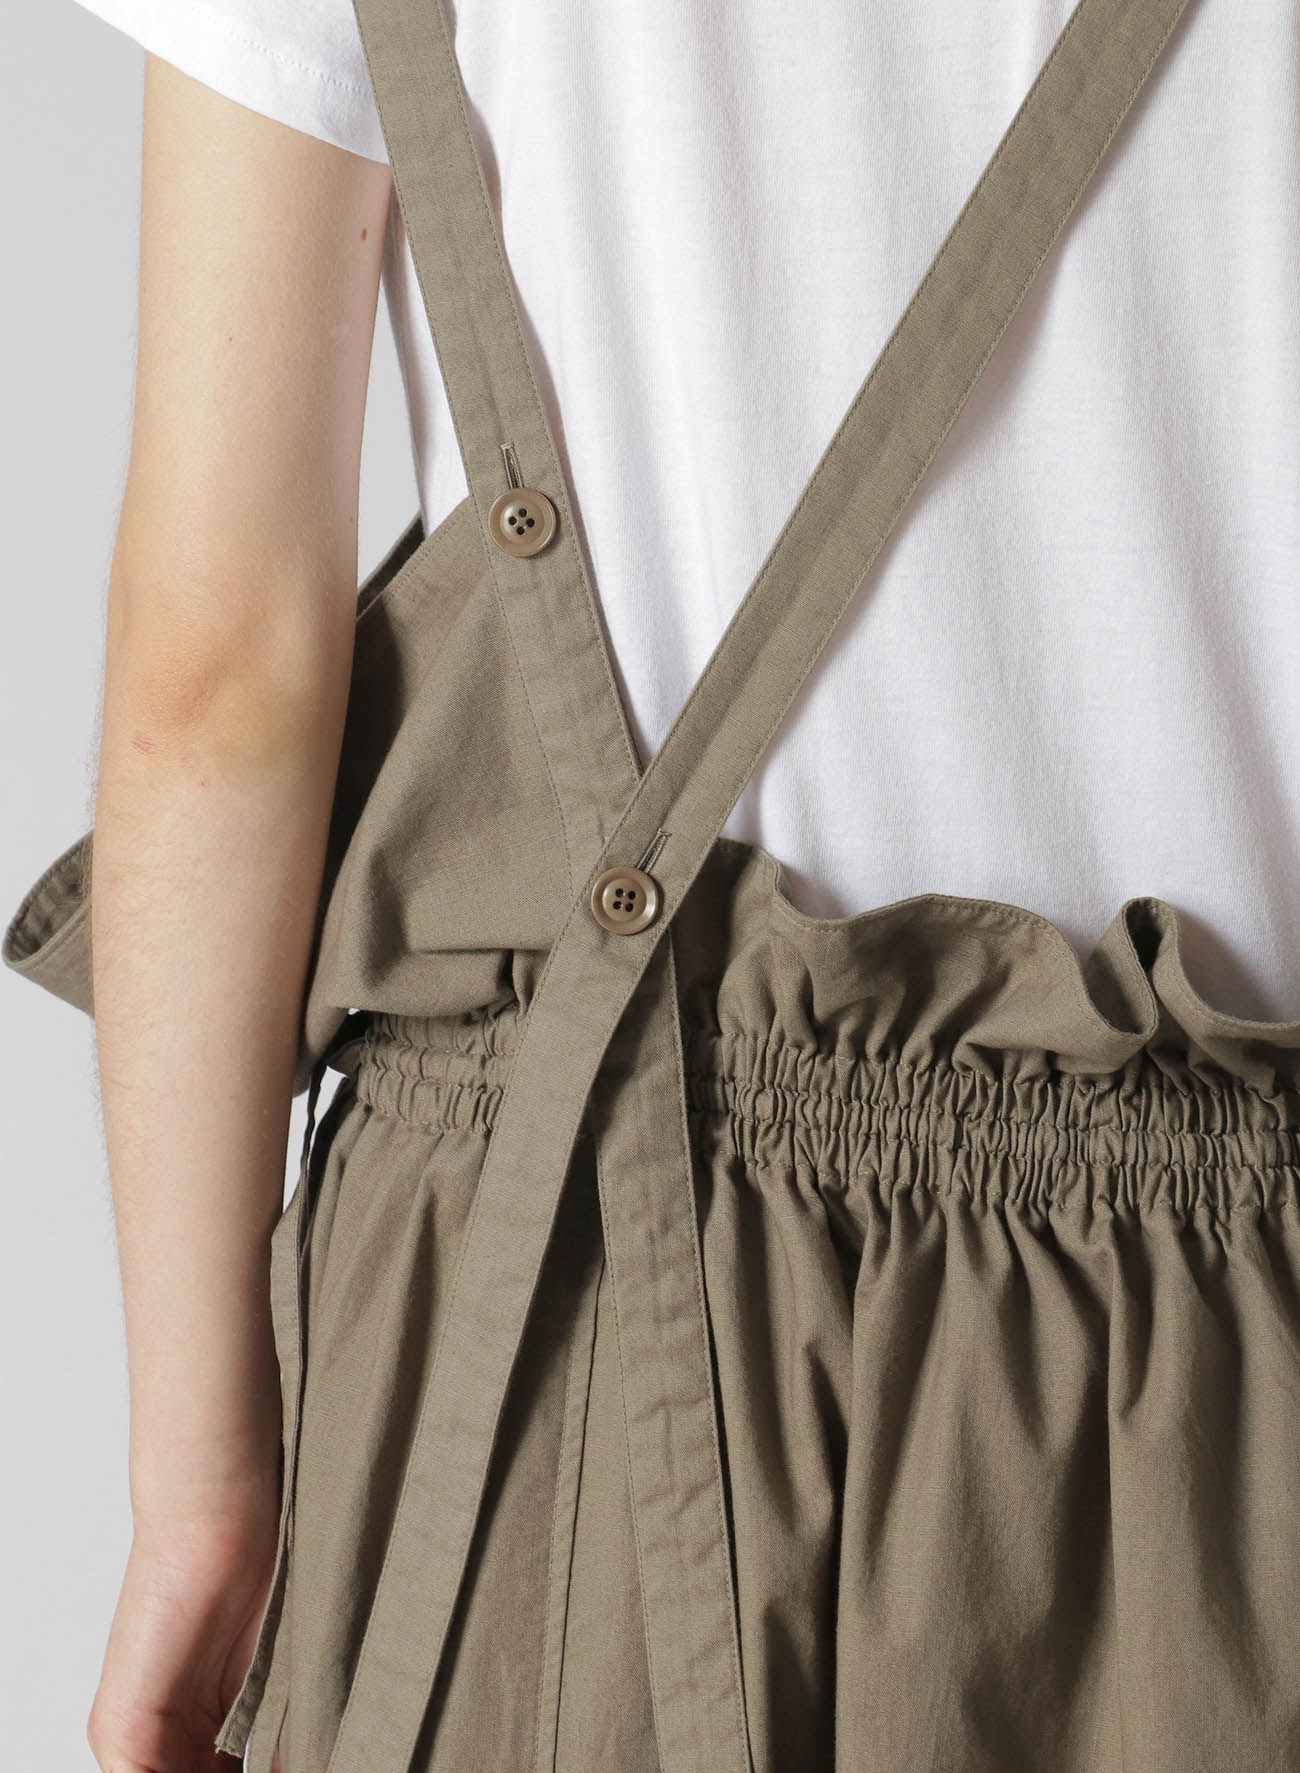 COTTON DUNGAREE GATHERED DRESS WITH SHOULDER STRAPS